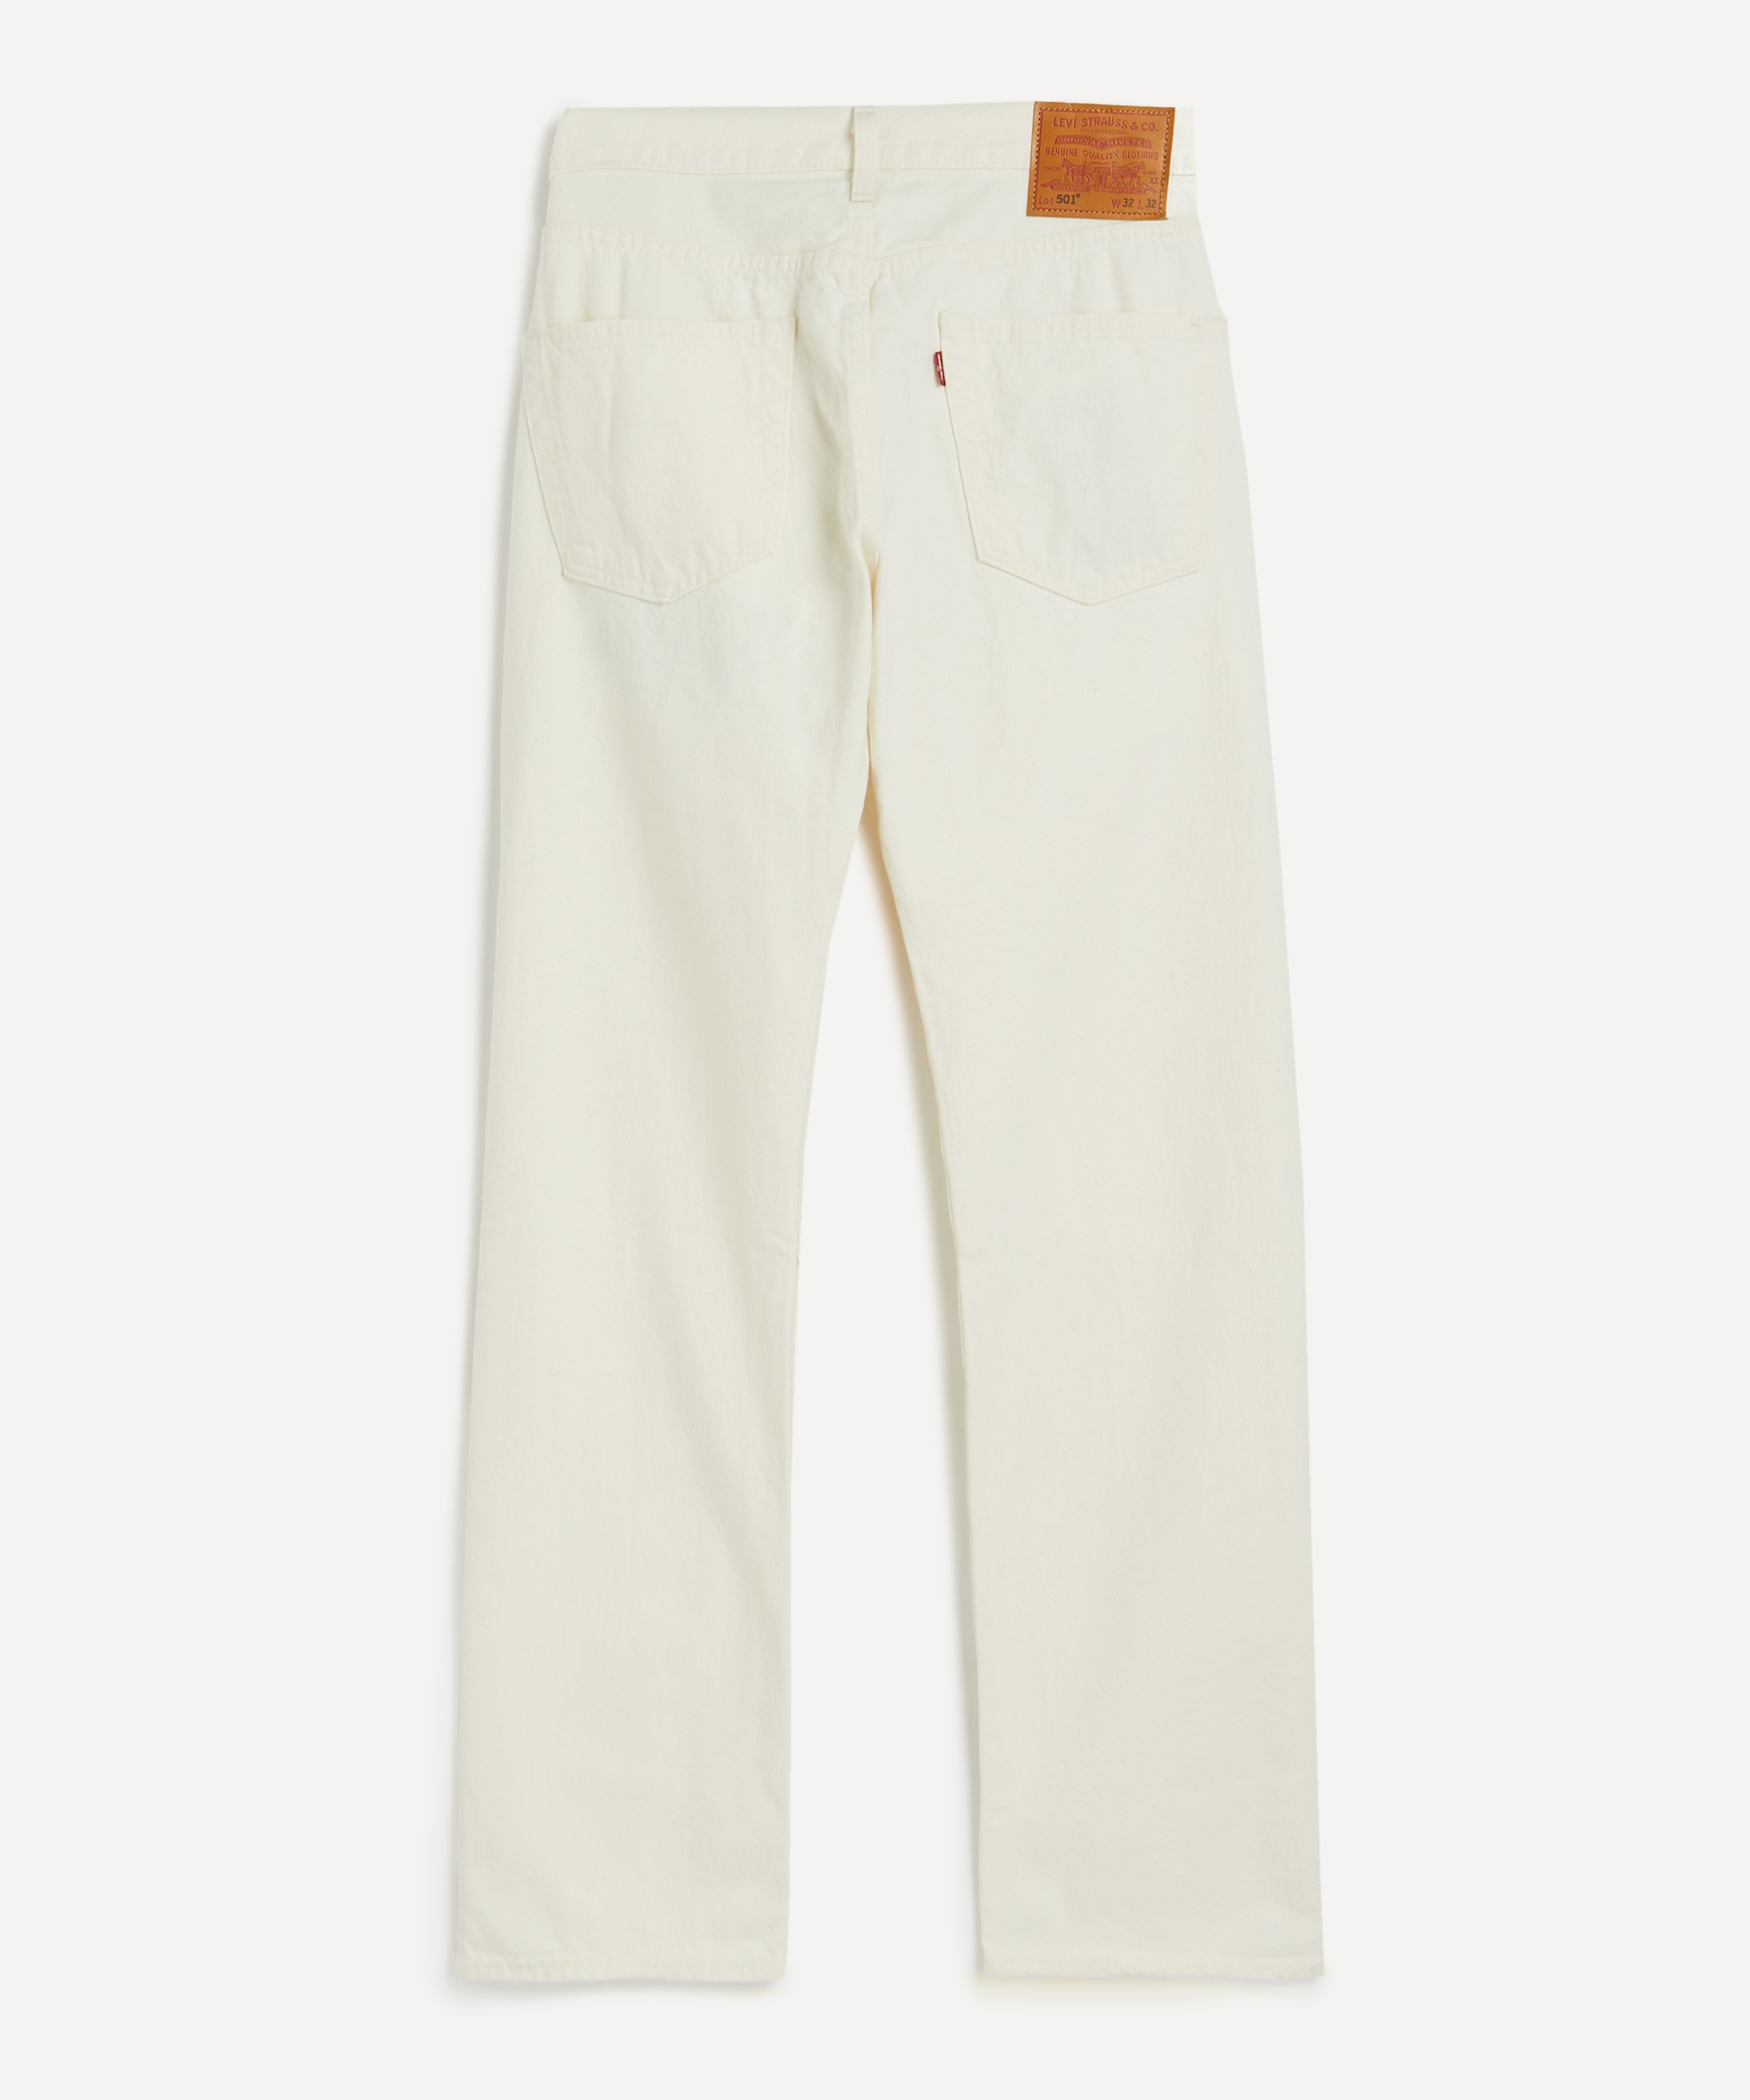 Levi's Made & Crafted - 501® Original Cream Jeans image number 2